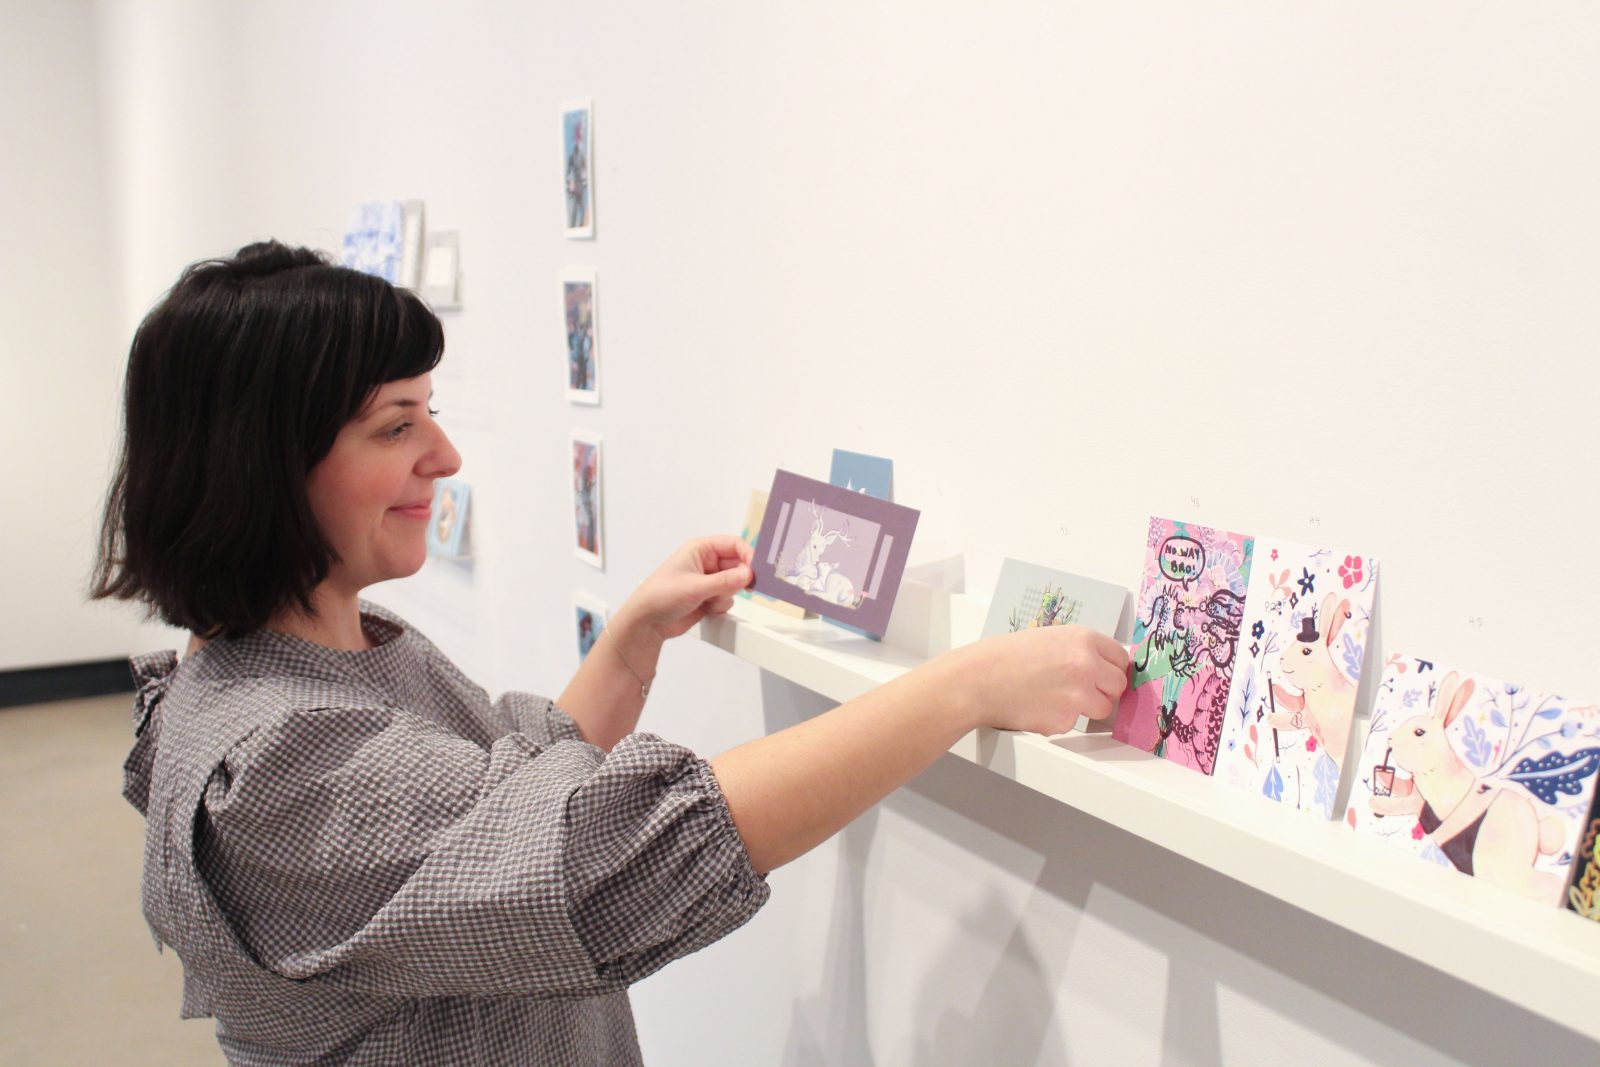 A female places a postcard on a shelf with other artistic creations in a gallery space.